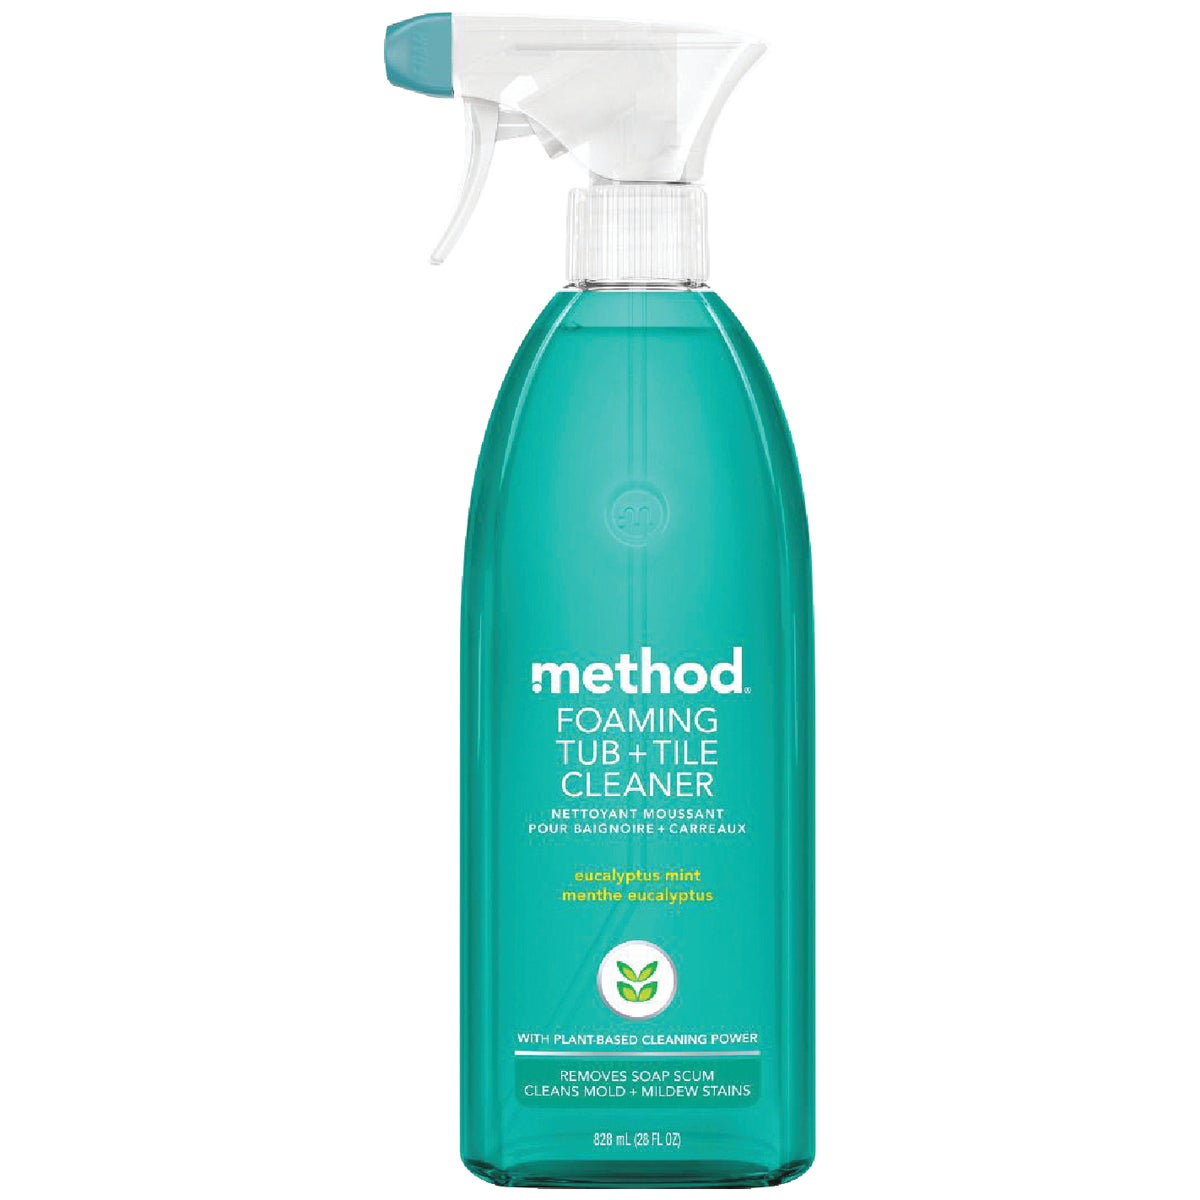 Item 601045, Let the powerful foaming action of our tub+ tile bathroom cleaner do your 